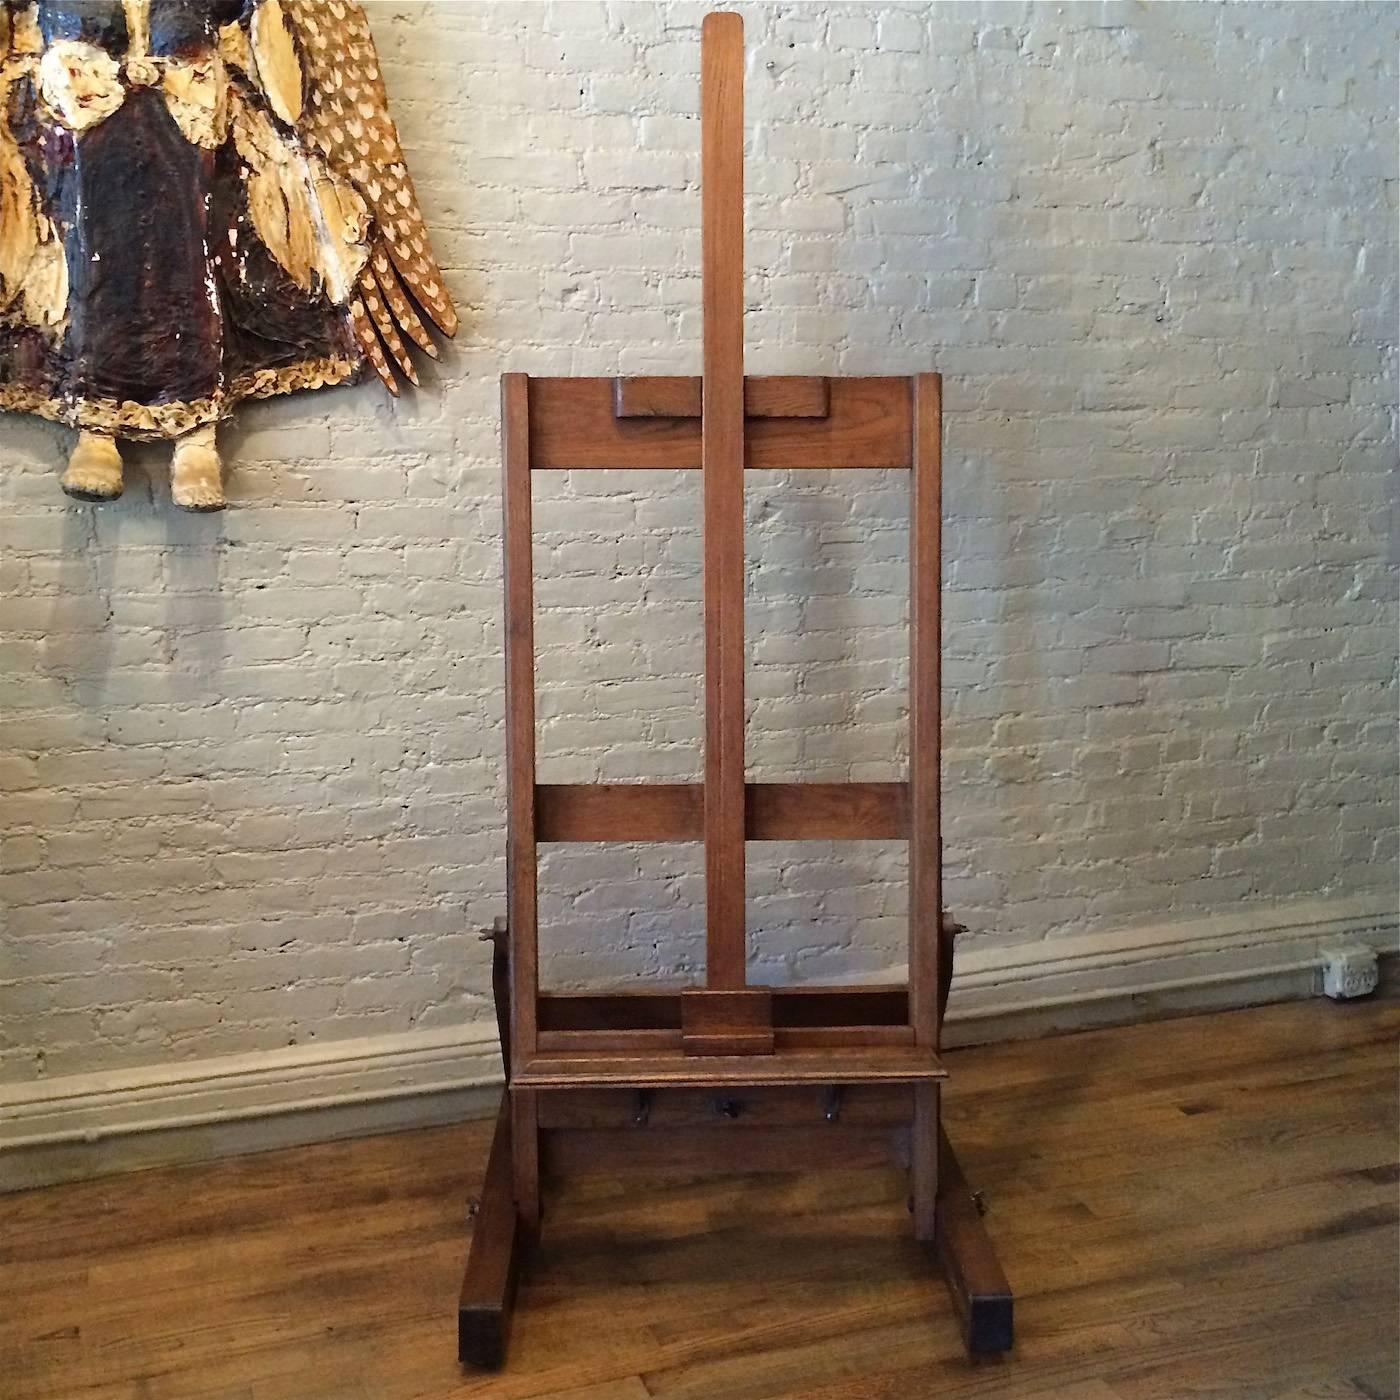 Large format, adjustable height, American Craftsman and artist easel, circa 1920s is solid oak on rolling base. Adjusting mechanisms are cast iron.